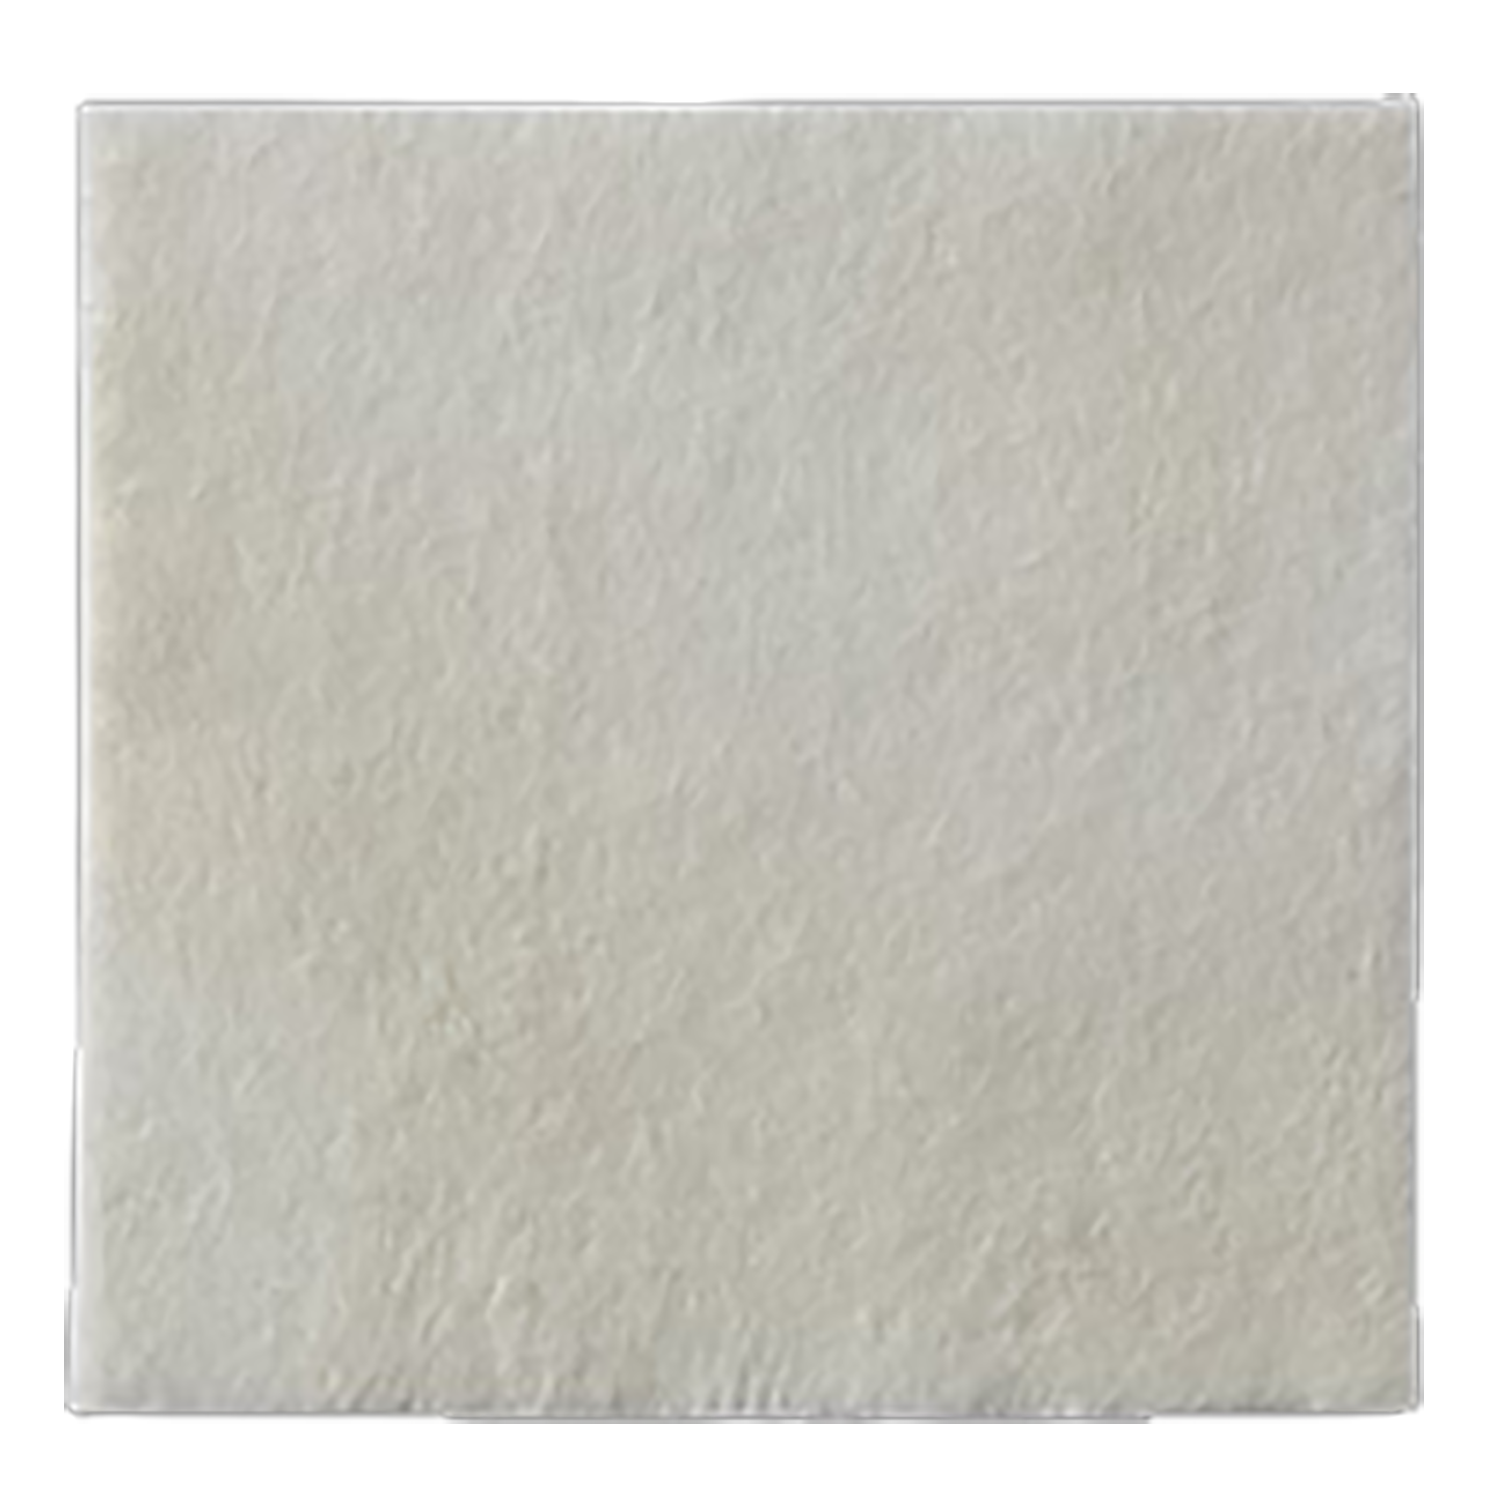 Alginate Antimicrobial Silver Dressing | 3 x 44cm  | Pack of 10 (1)